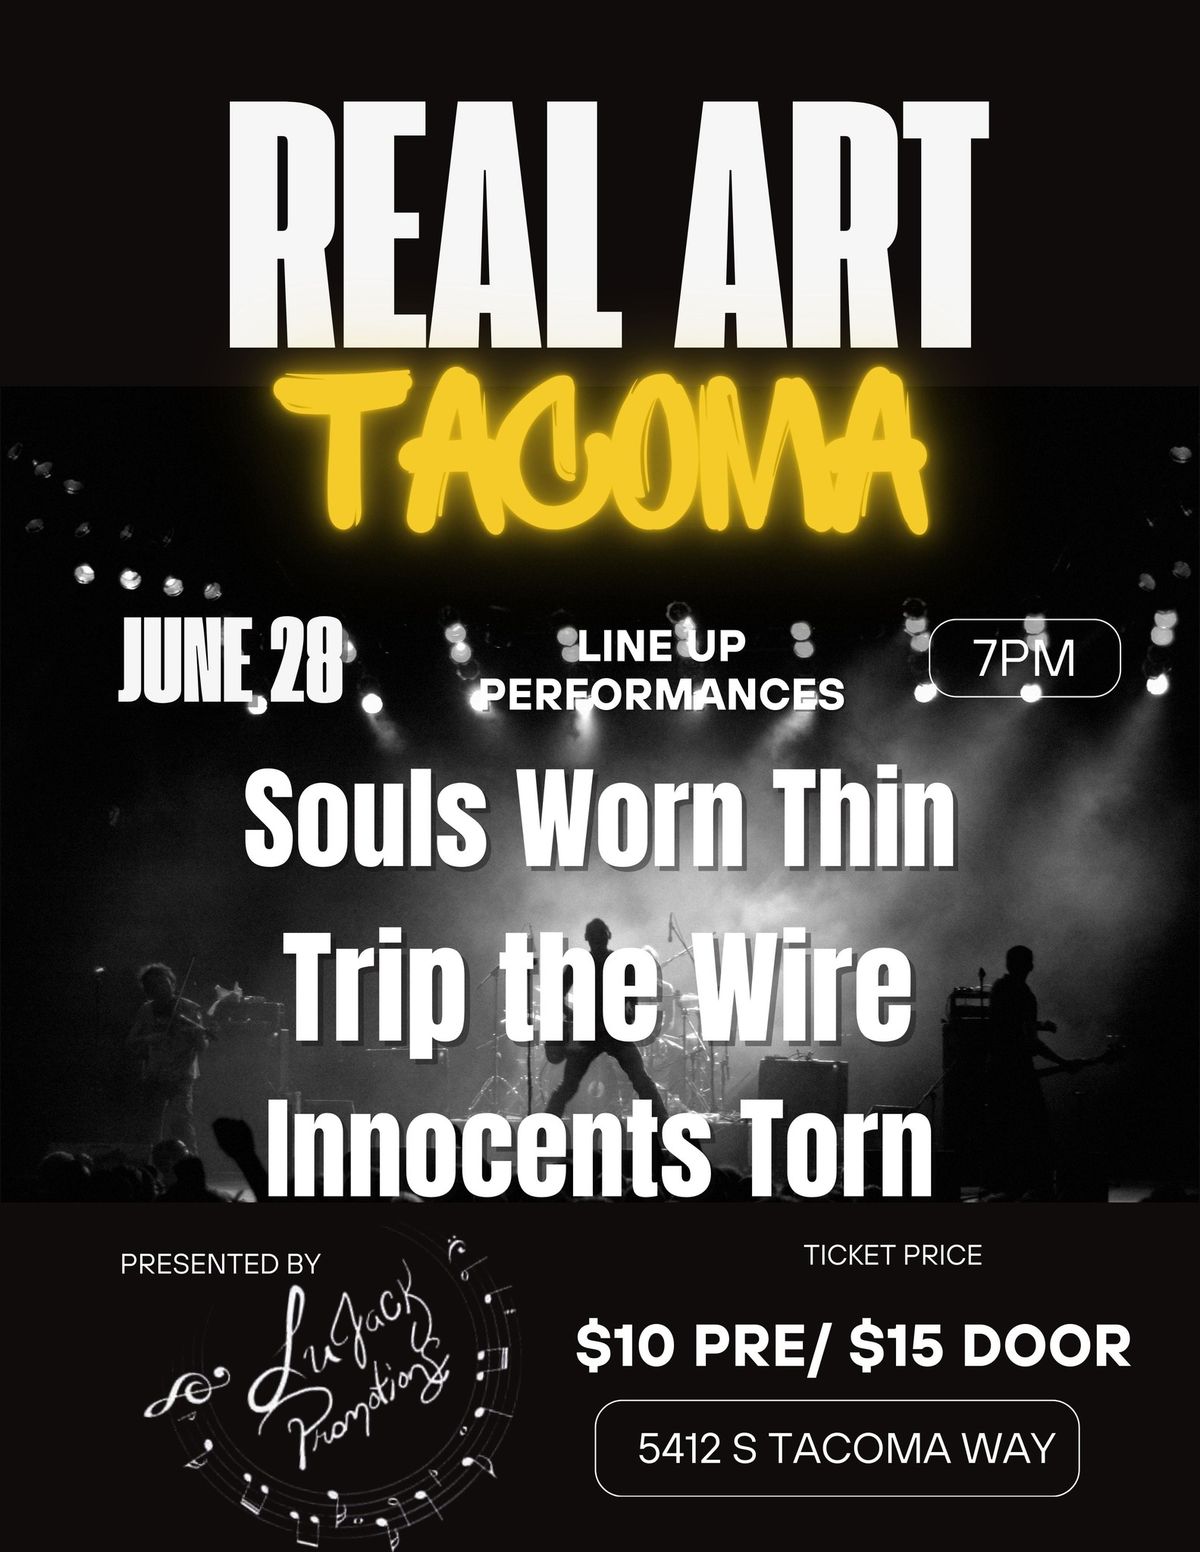 Lujack Promotions x Real Art Tacoma Presents: Souls Worn Thin, Trip The Wire, Innocents Torn